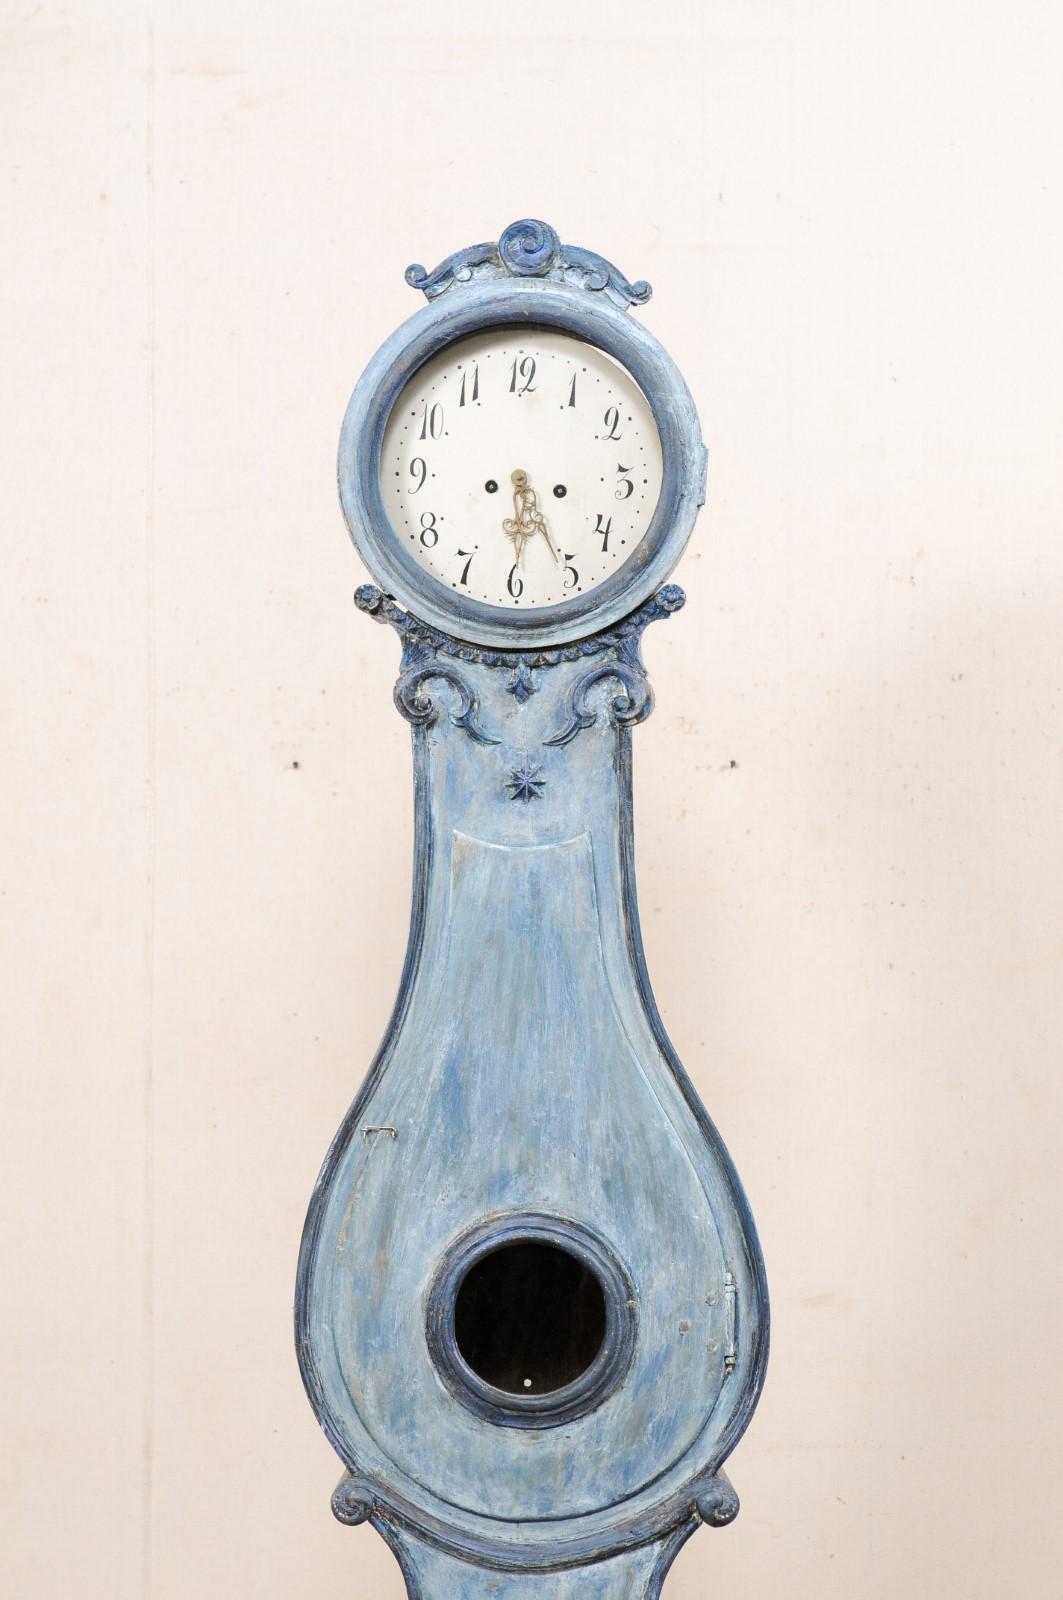 A Swedish Fryksdahl floor clock with shapely body and carved crown from the 19th century. This antique Fryksdahl clock from Sweden has a raised crest which is carved in swirling medallion at center, flanked within a pair of leafy scrolls, resting